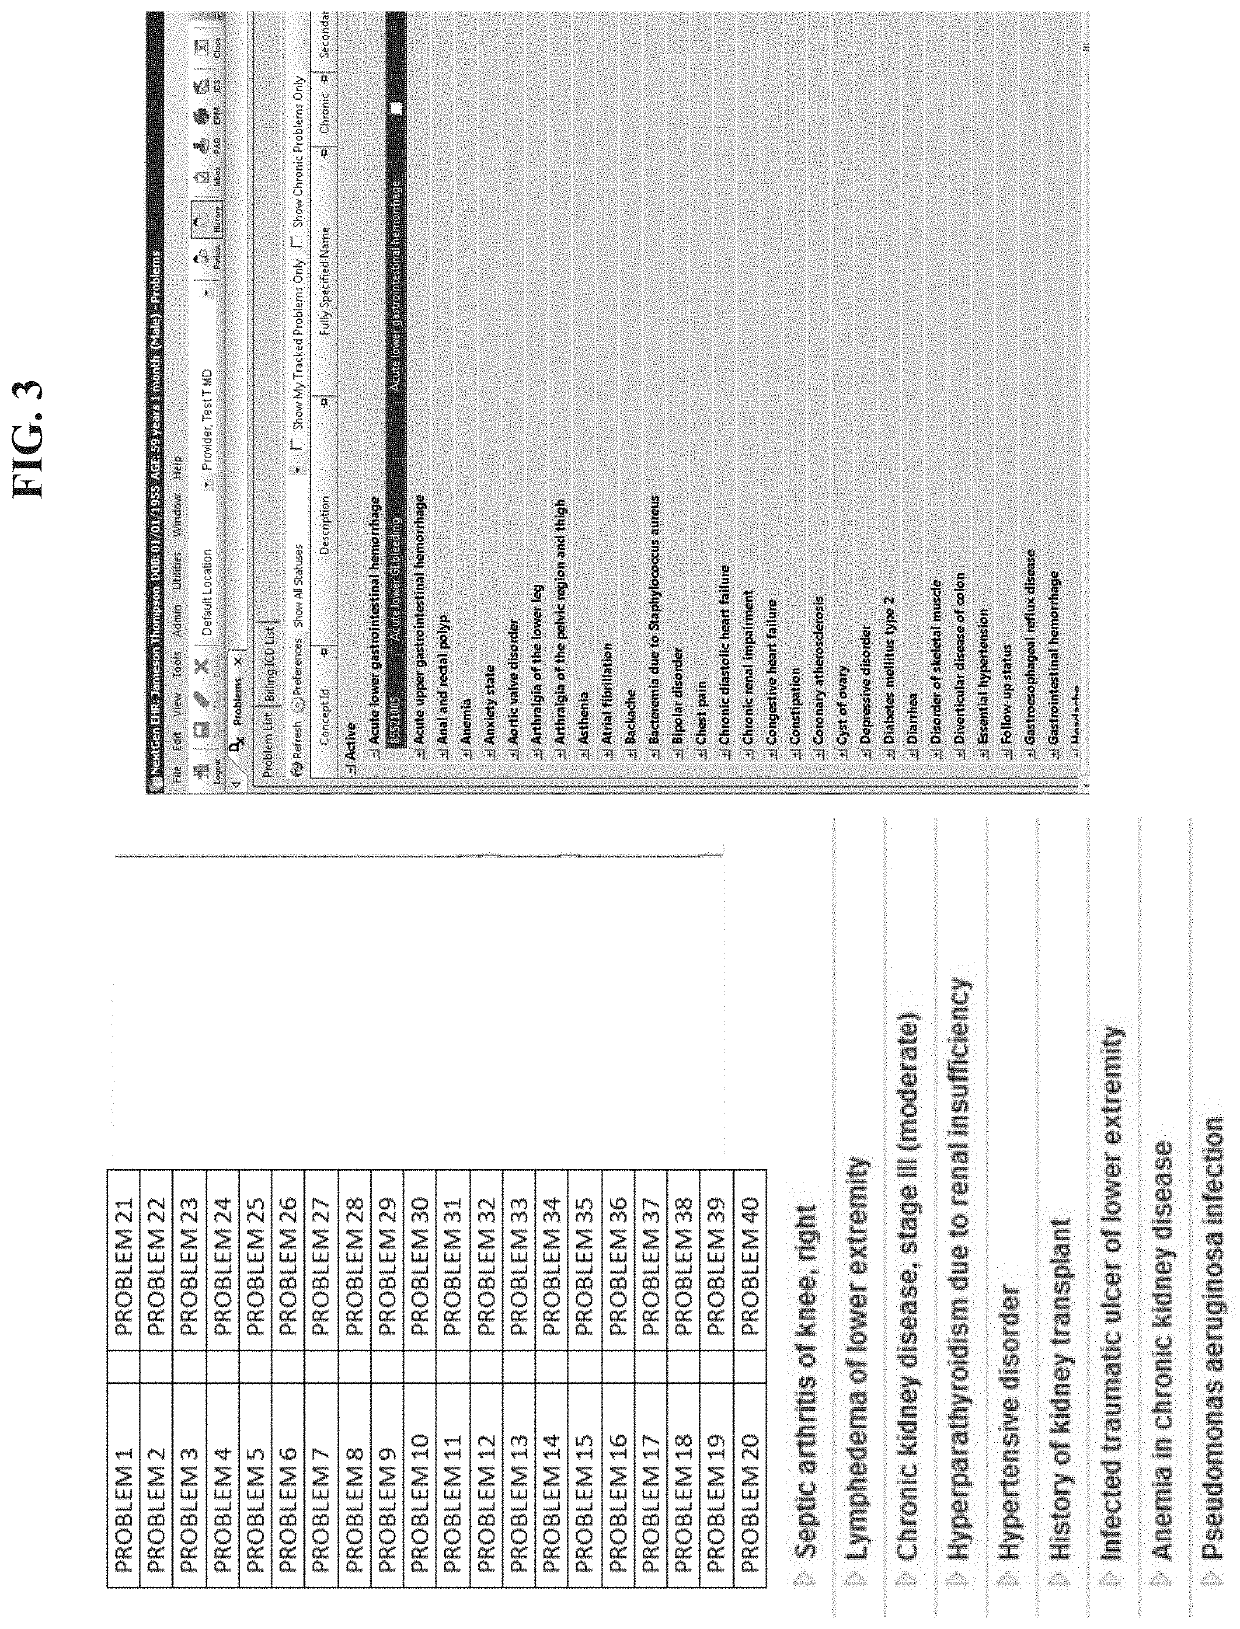 System and Method for Generating and Updating a User Interface to Evaluate an Electronic Medical Record